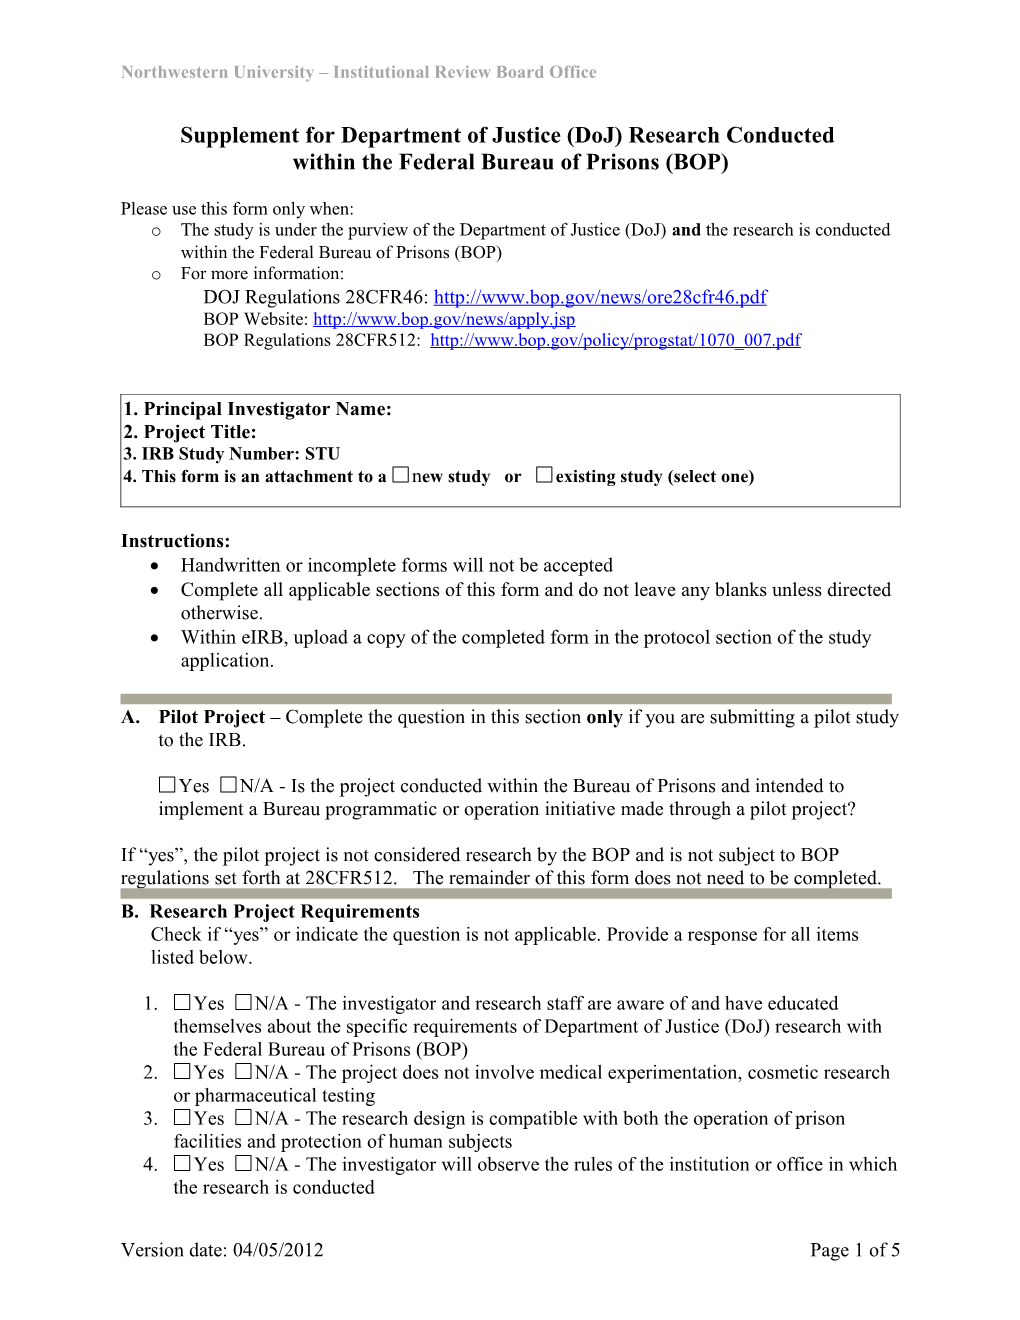 Department of Justice and Bureau of Prisons Checklist